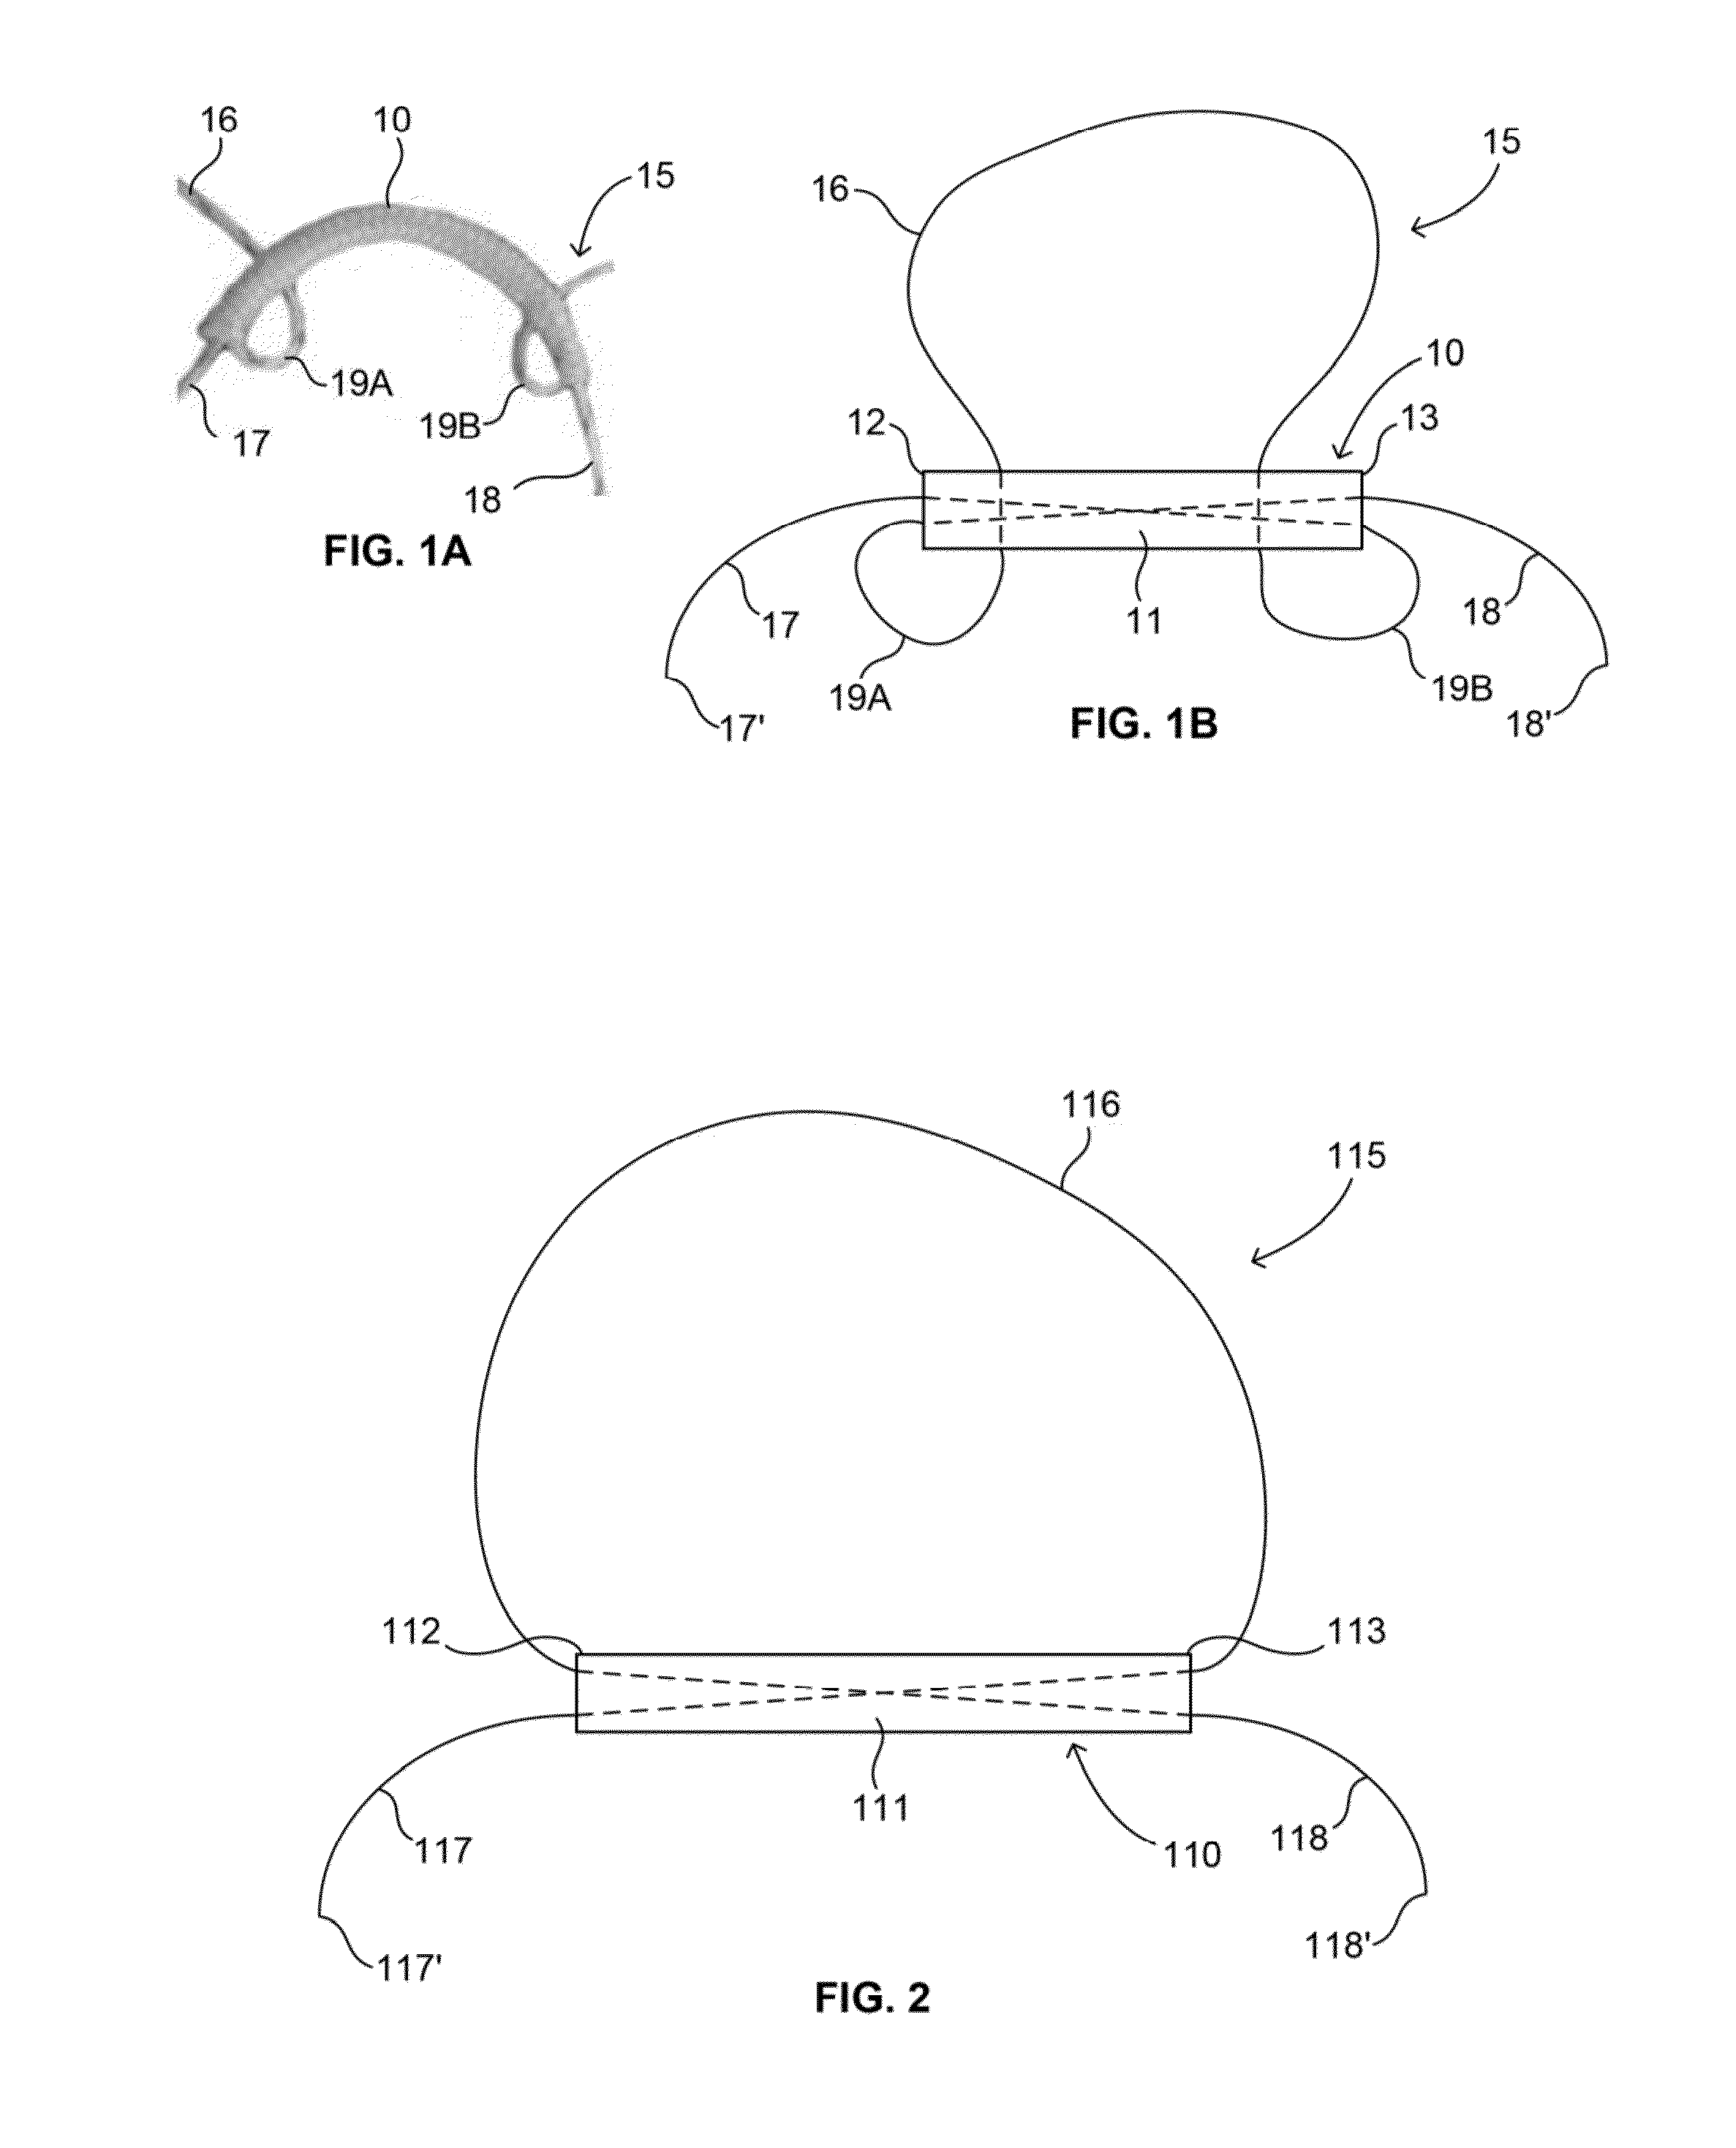 Soft tissue fixation devices and methods